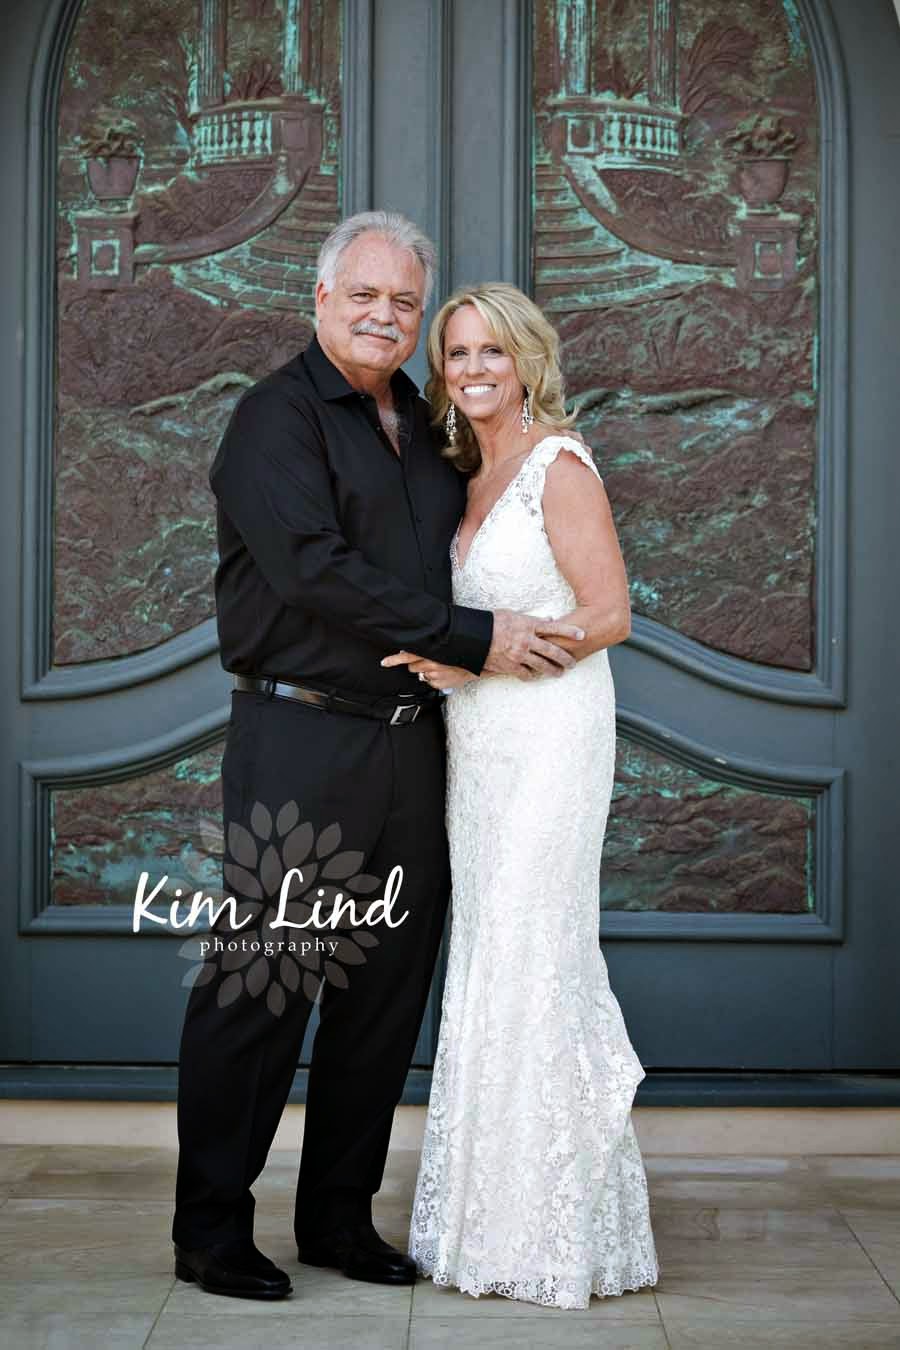 Kim Lind Photography Suzanne And Bruce Married Kim